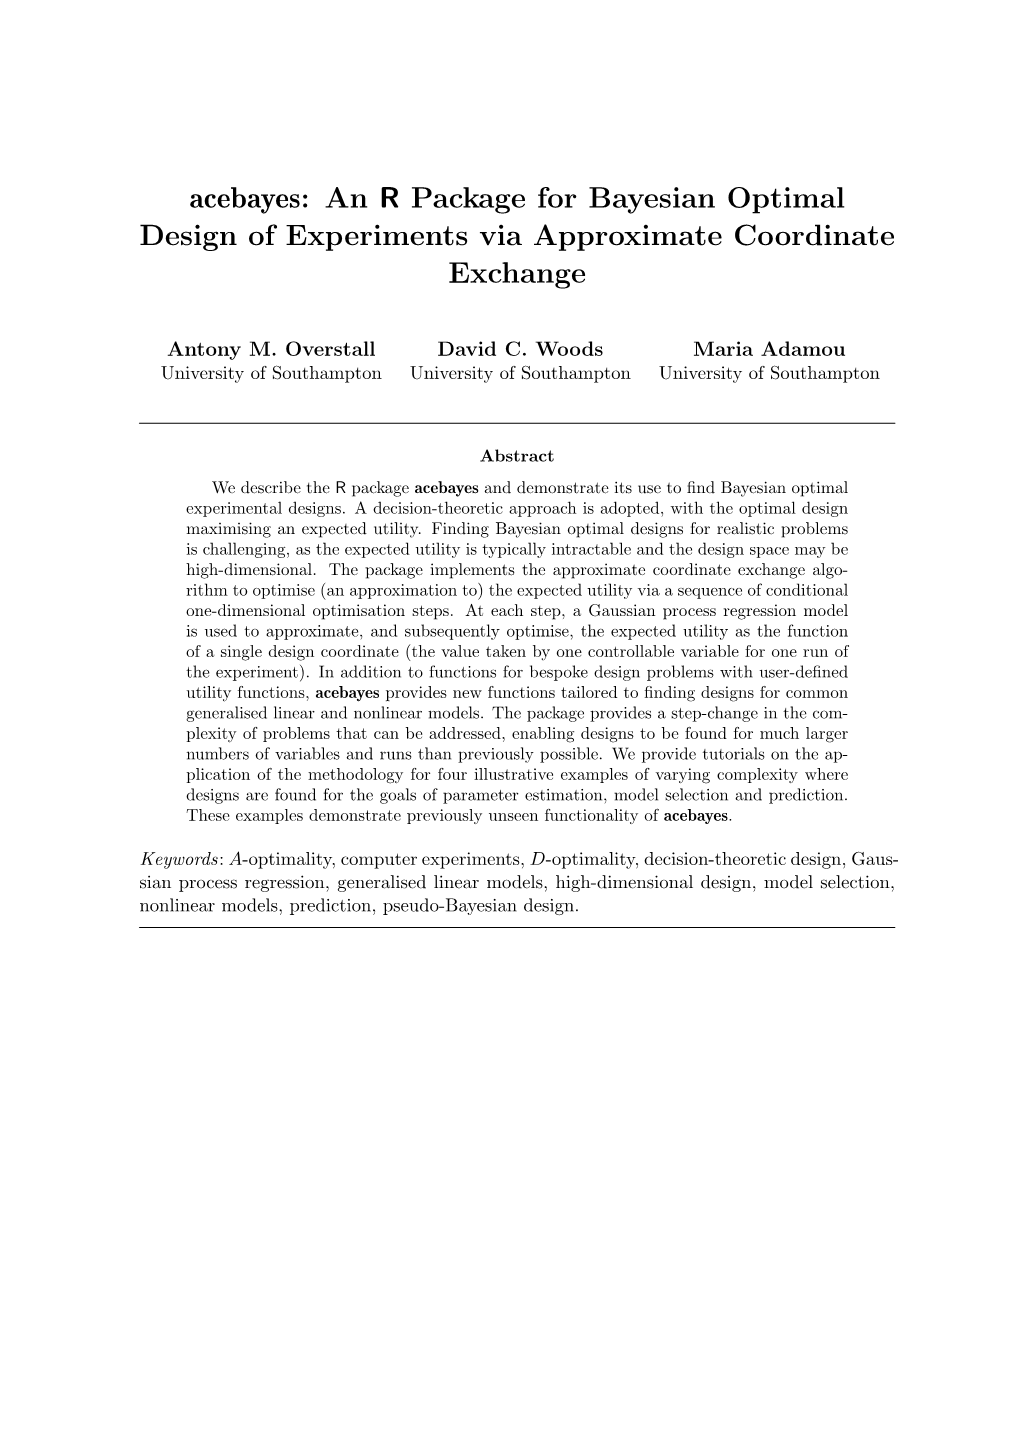 Acebayes: an R Package for Bayesian Optimal Design of Experiments Via Approximate Coordinate Exchange